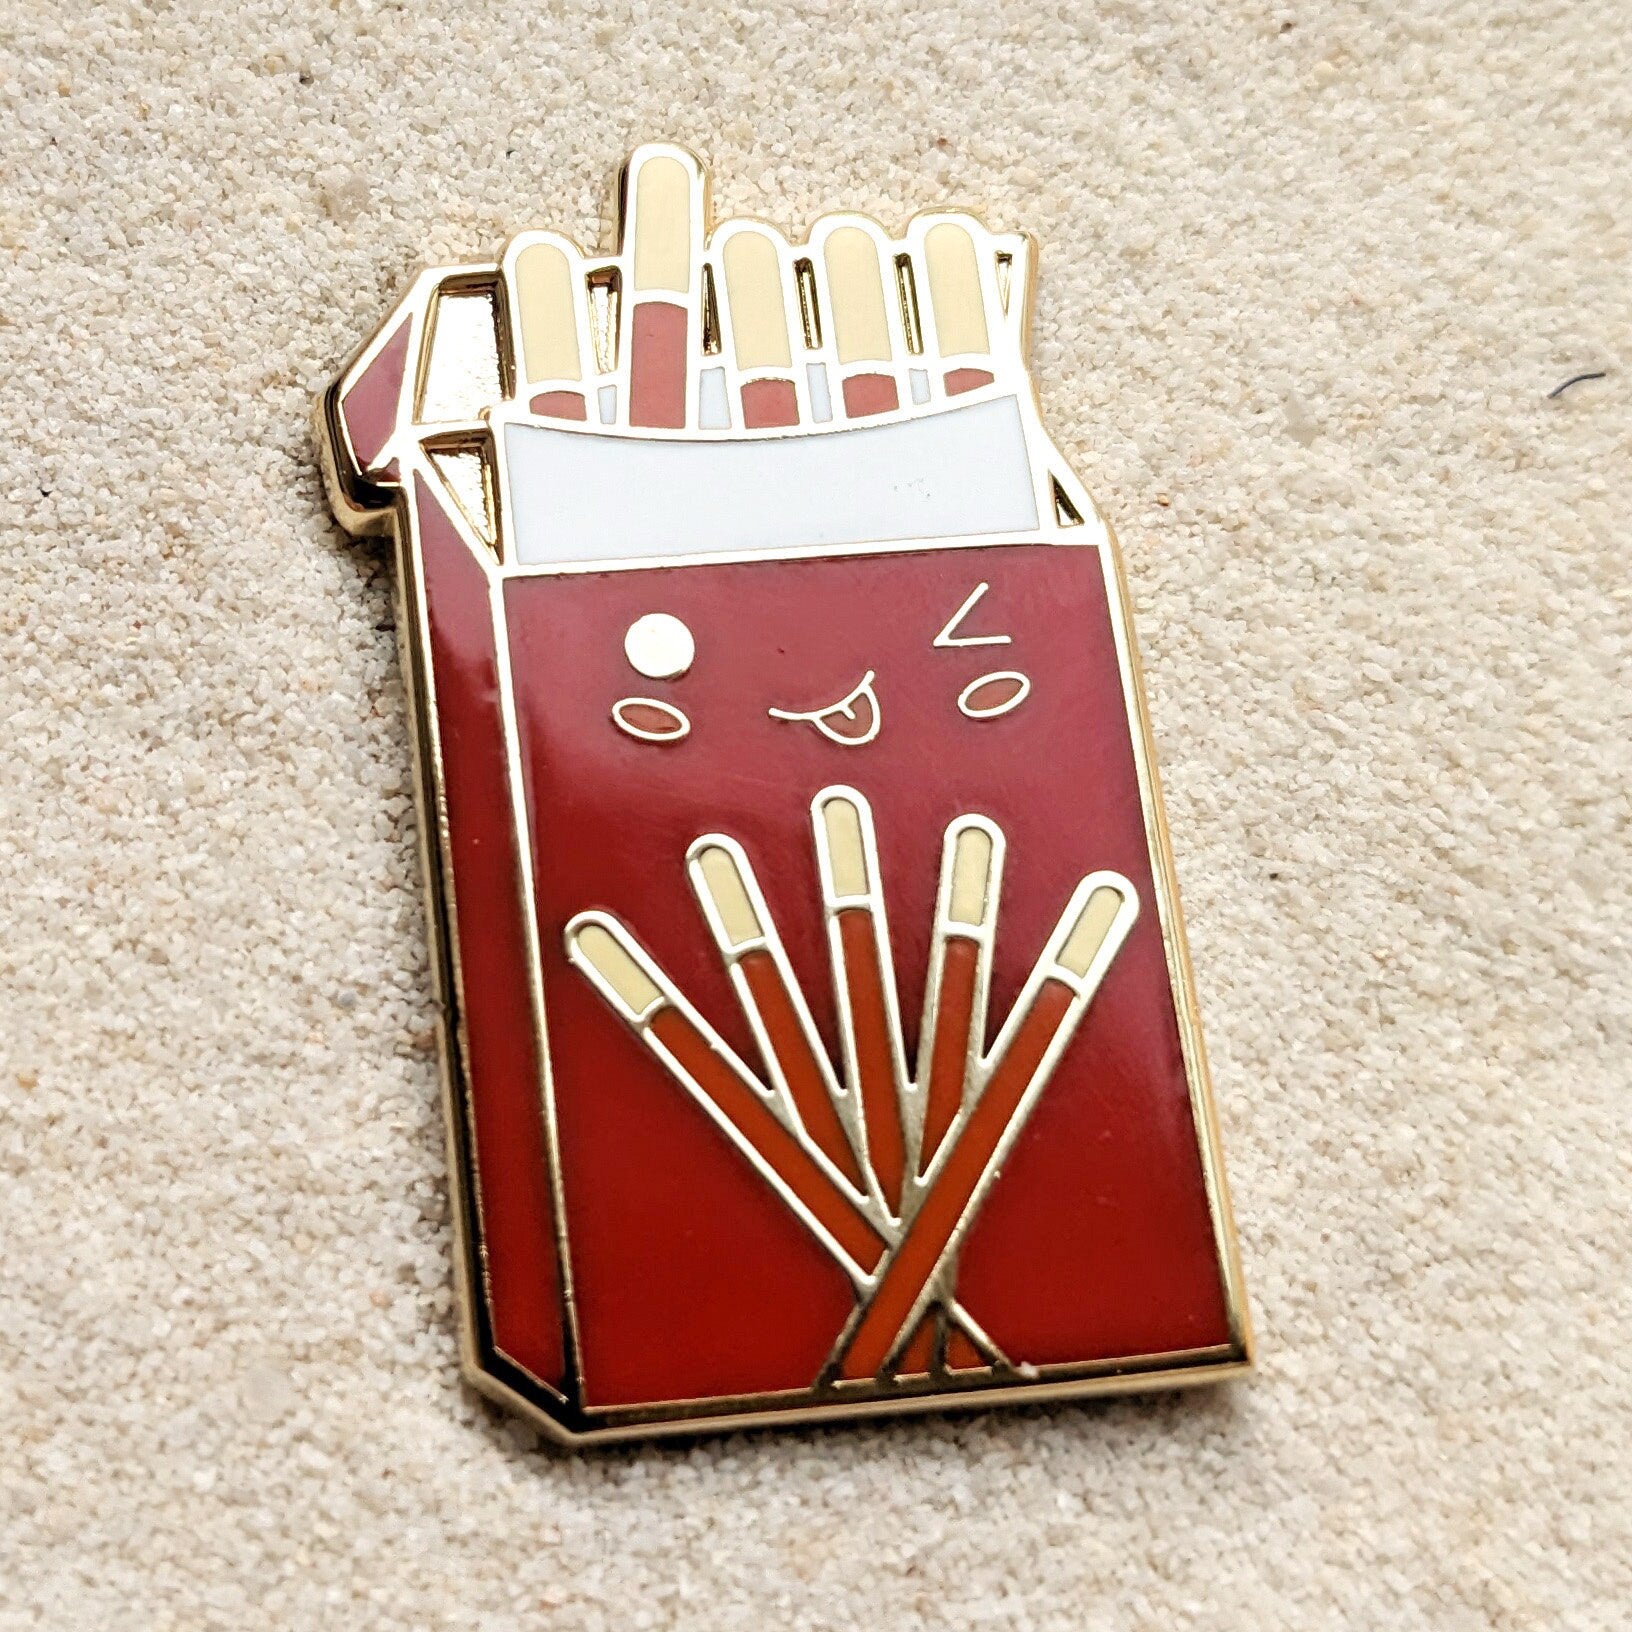 Pocky Chocolate Biscuit Cookie Candy - 1.5" Enamel Pin Lapel Metal Badge